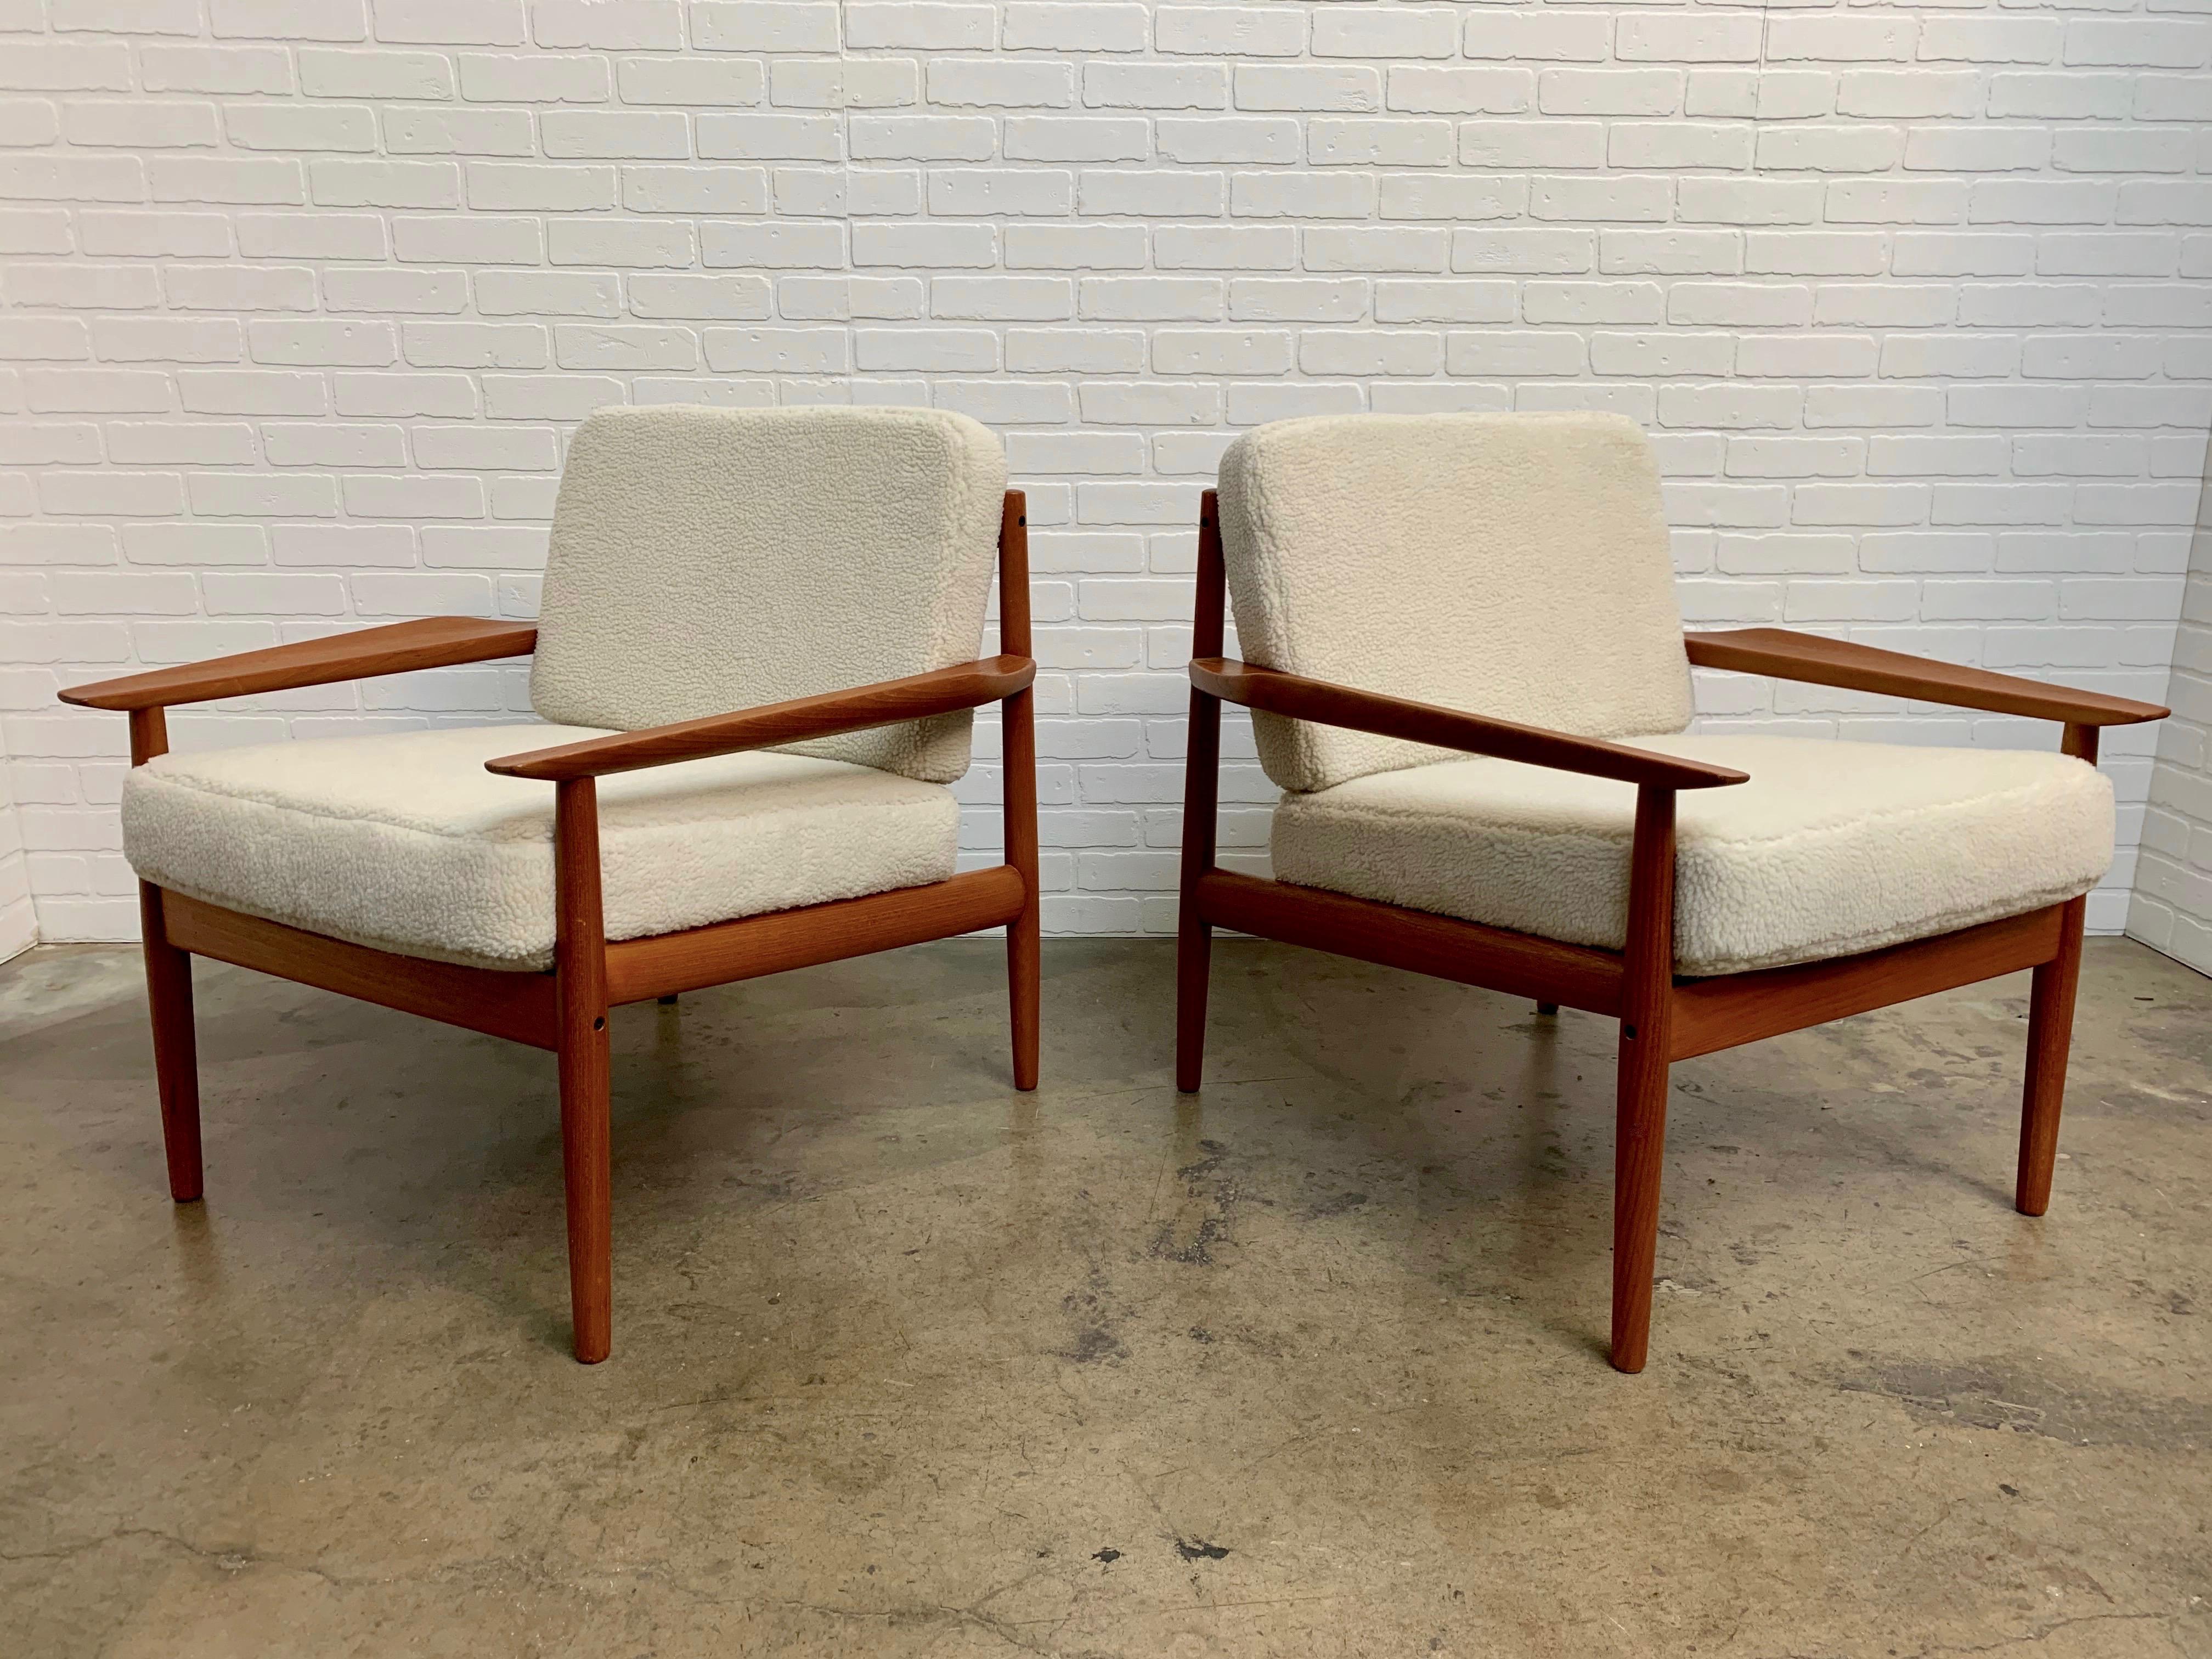 Solid teak armchairs with new Sherpa faux fur designed by Arne Vodder.